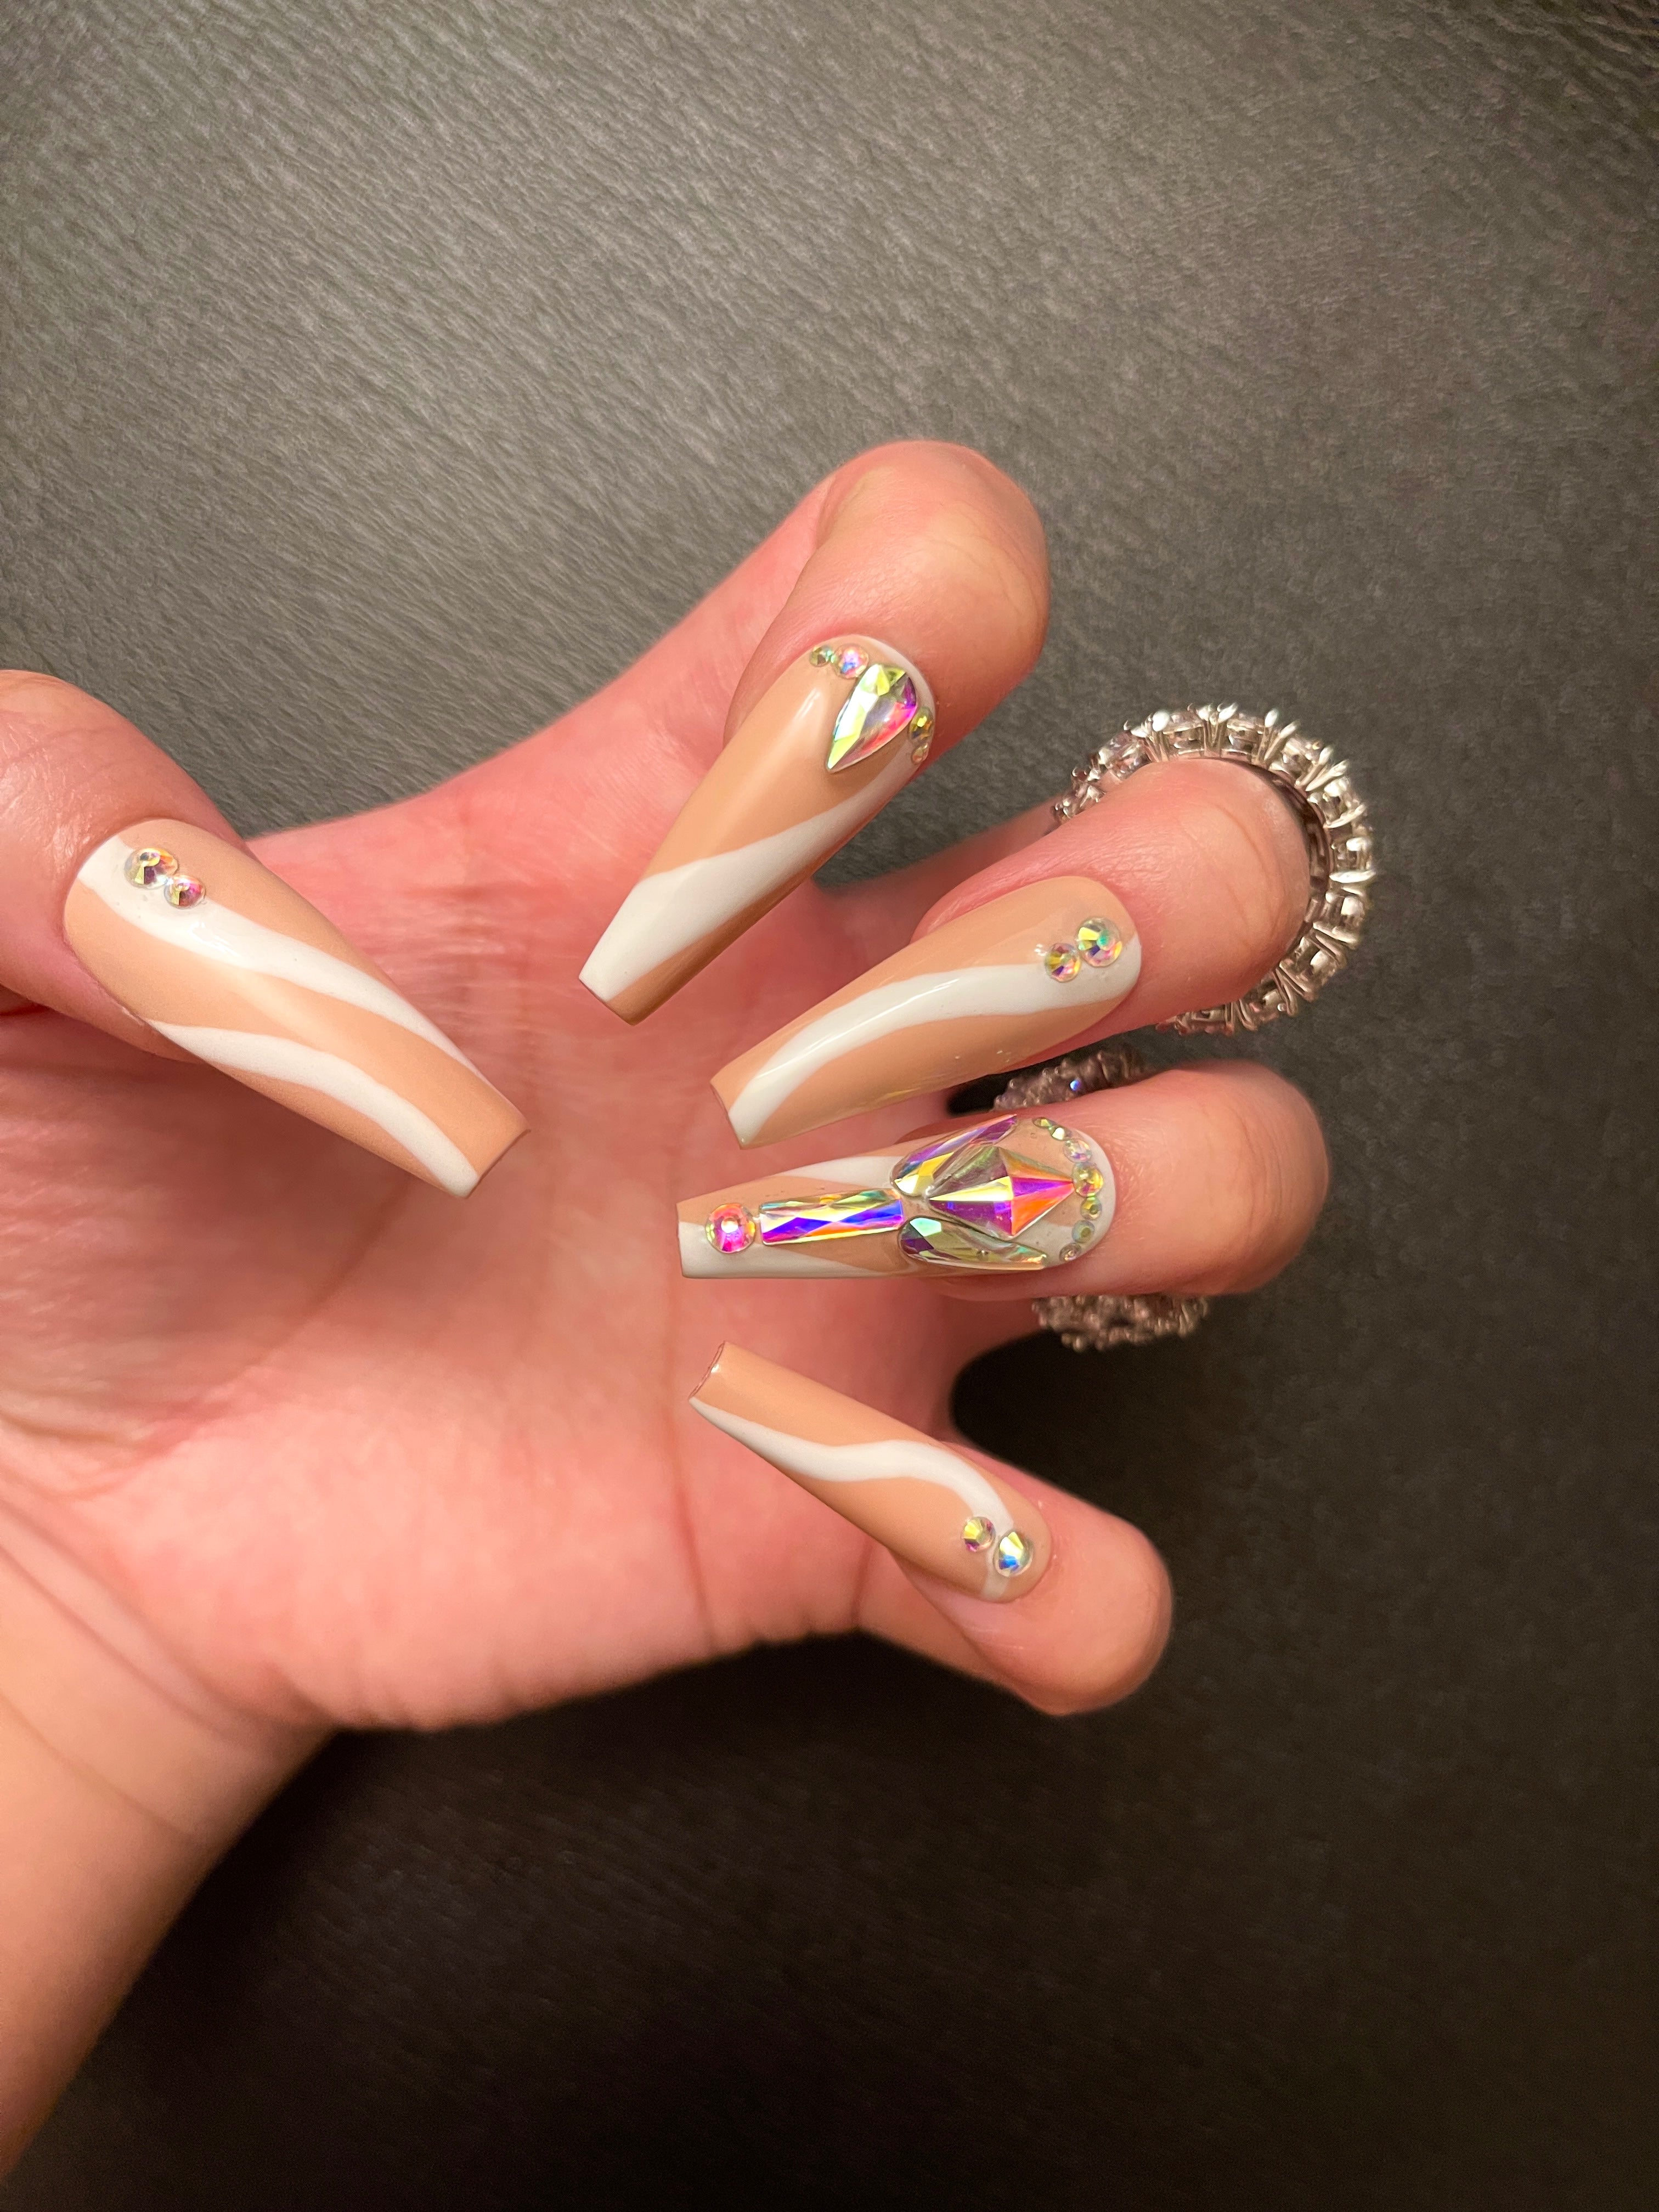 27 Barely There Nail Designs For Any Skin Tone : French Almond Nails with  Bling